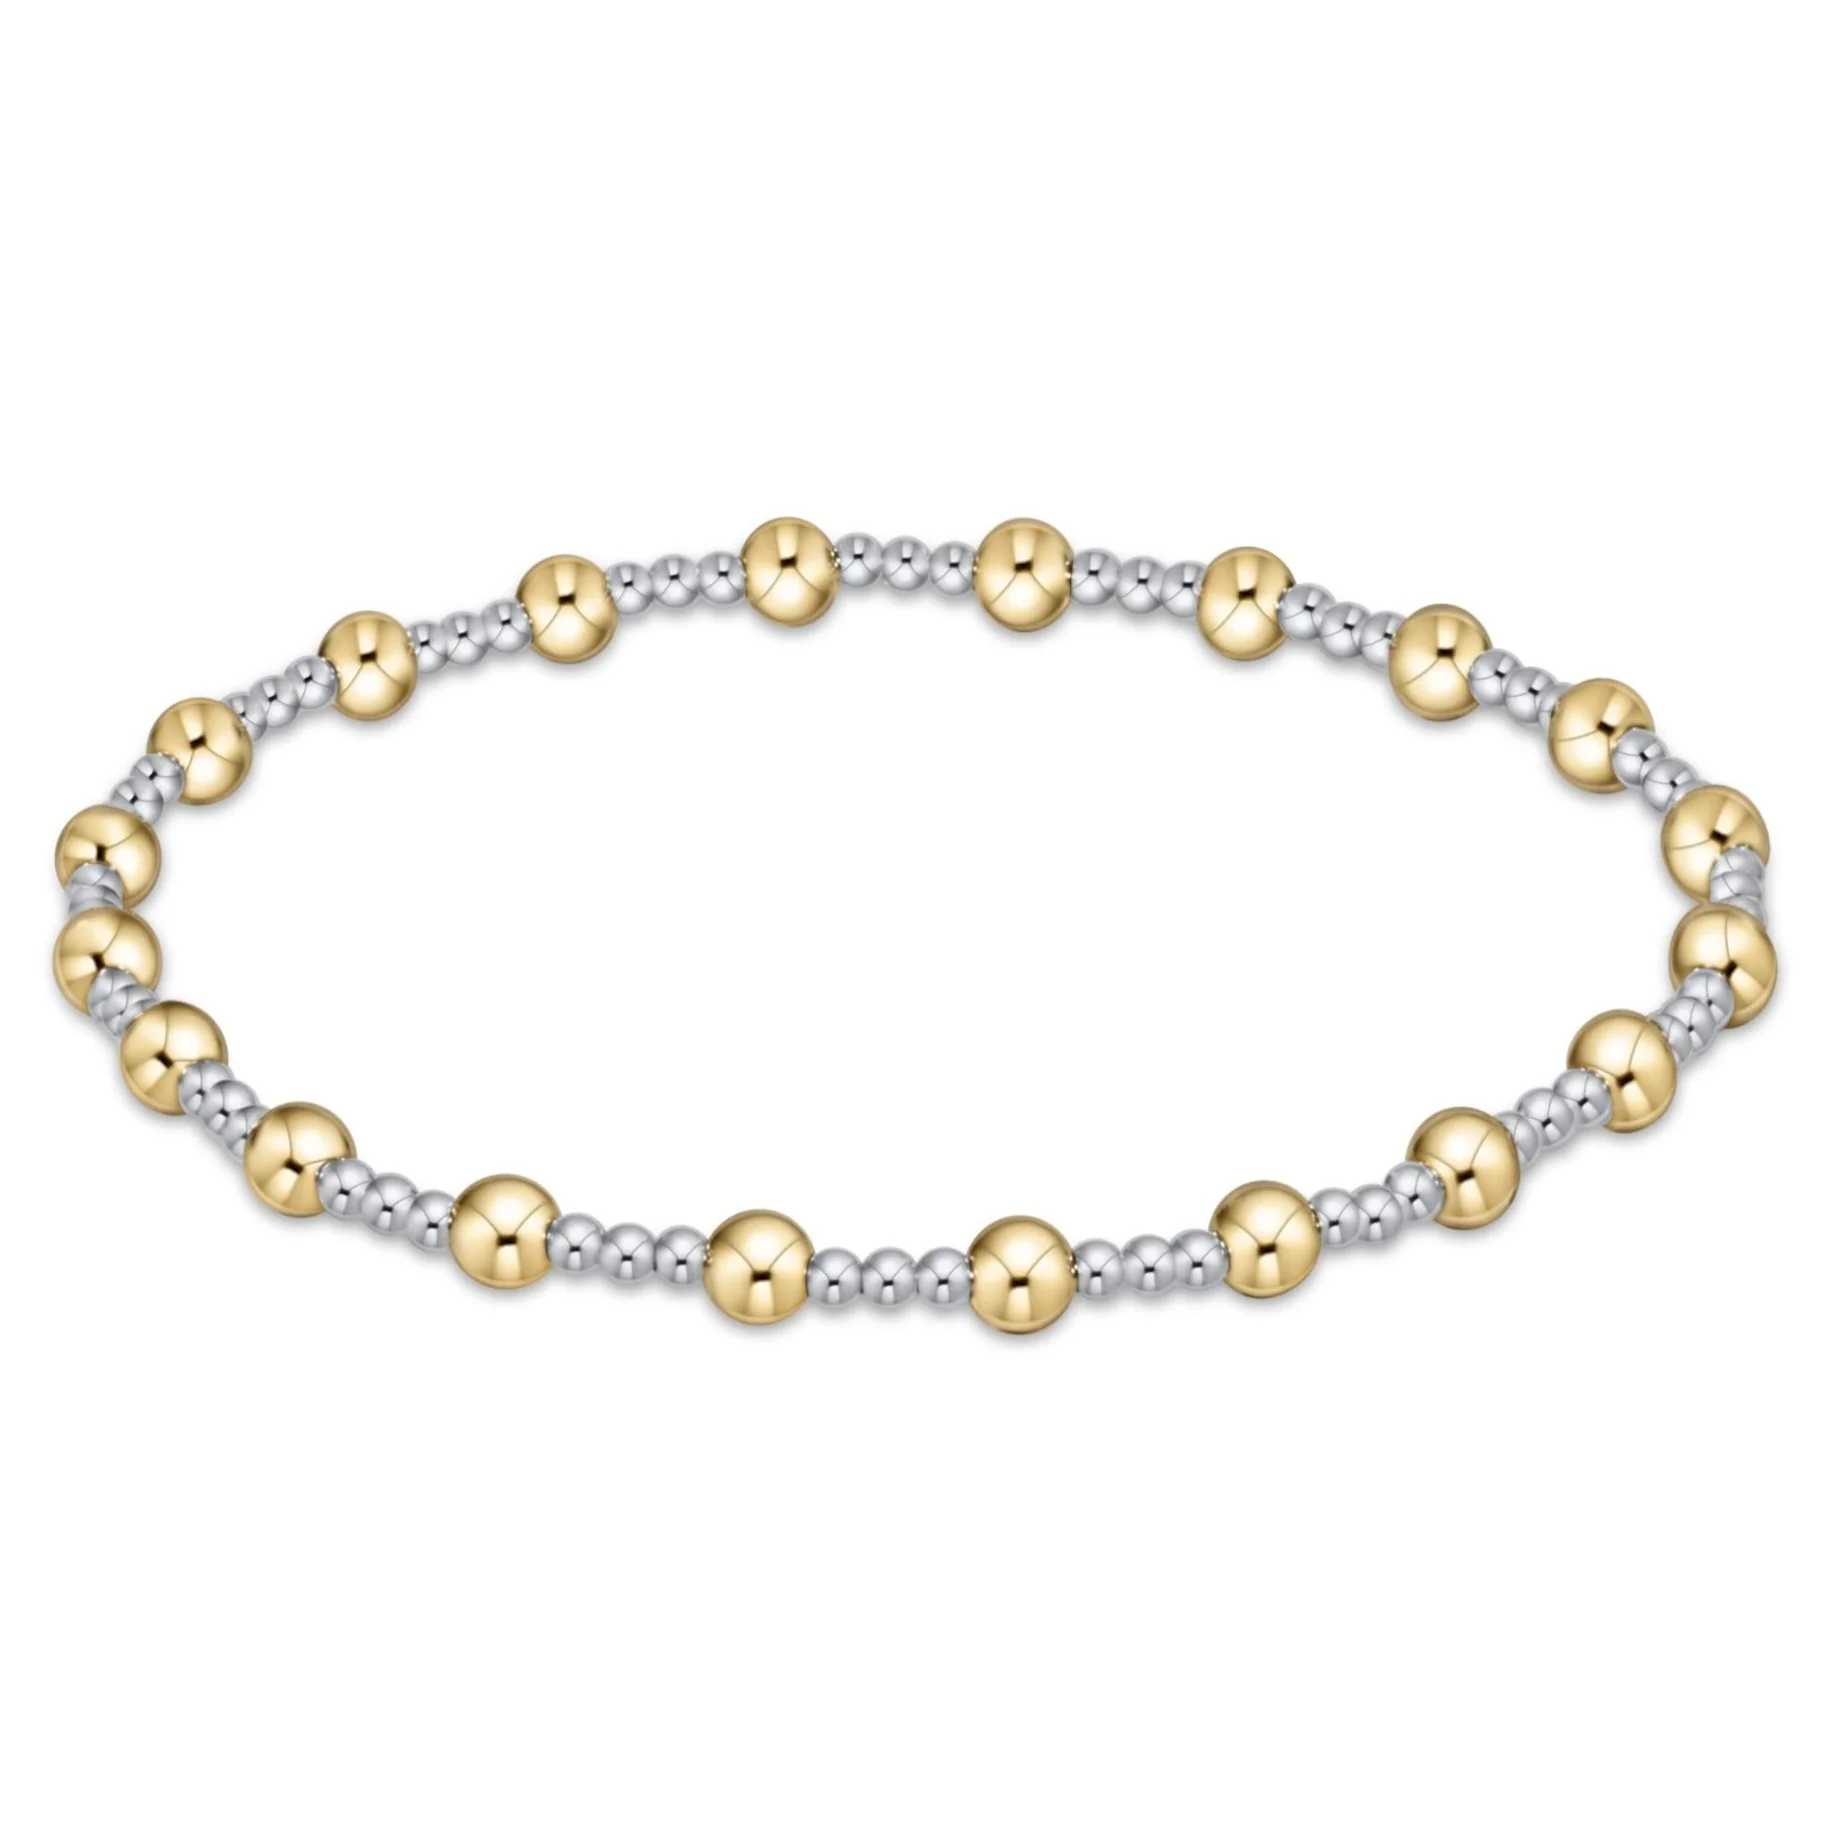 enewton - Classic Sincerity Pattern with 4mm bead bracelet in Silver and Gold